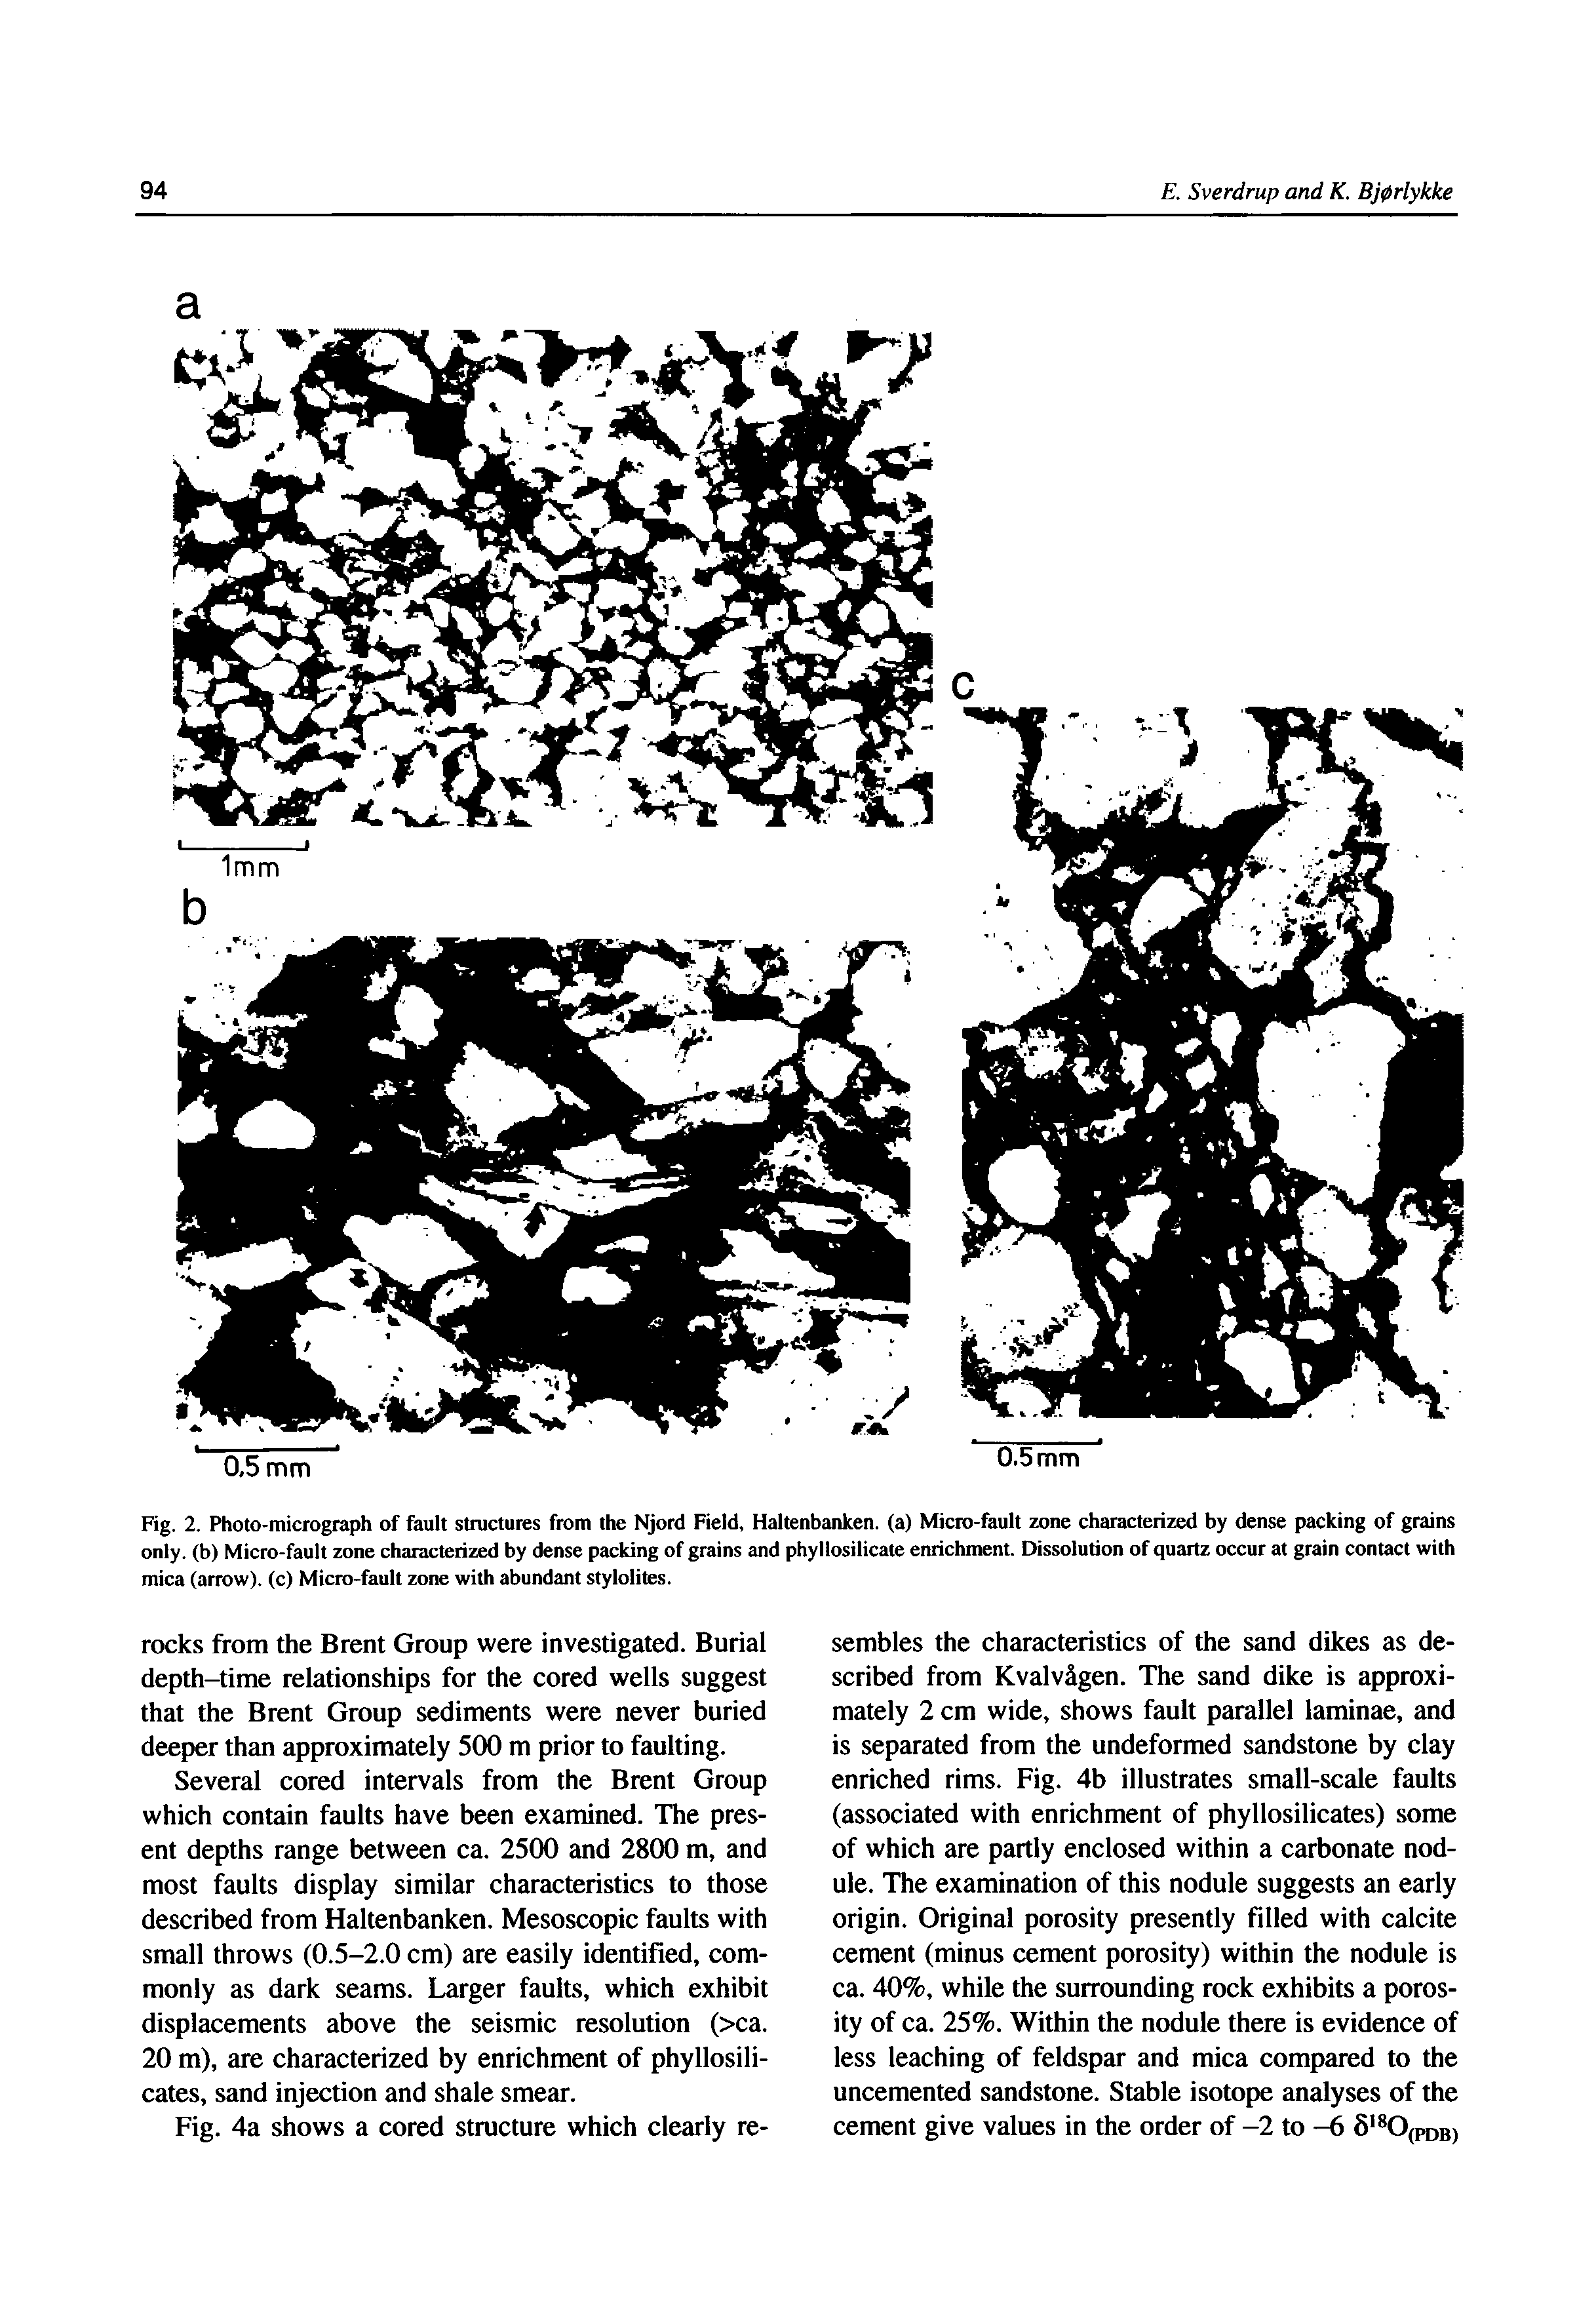 Fig. 2. Photo-micrograph of fault structures from the Njord Field, Haltenbanken. (a) Micro-fault zone characterized by dense packing of grains only, (b) Micro-fault zone characterized by dense packing of grains and phyllosilicate enrichment. Dissolution of quartz occur at grain contact with mica (arrow), (c) Micro-fault zone with abundant stylolites.